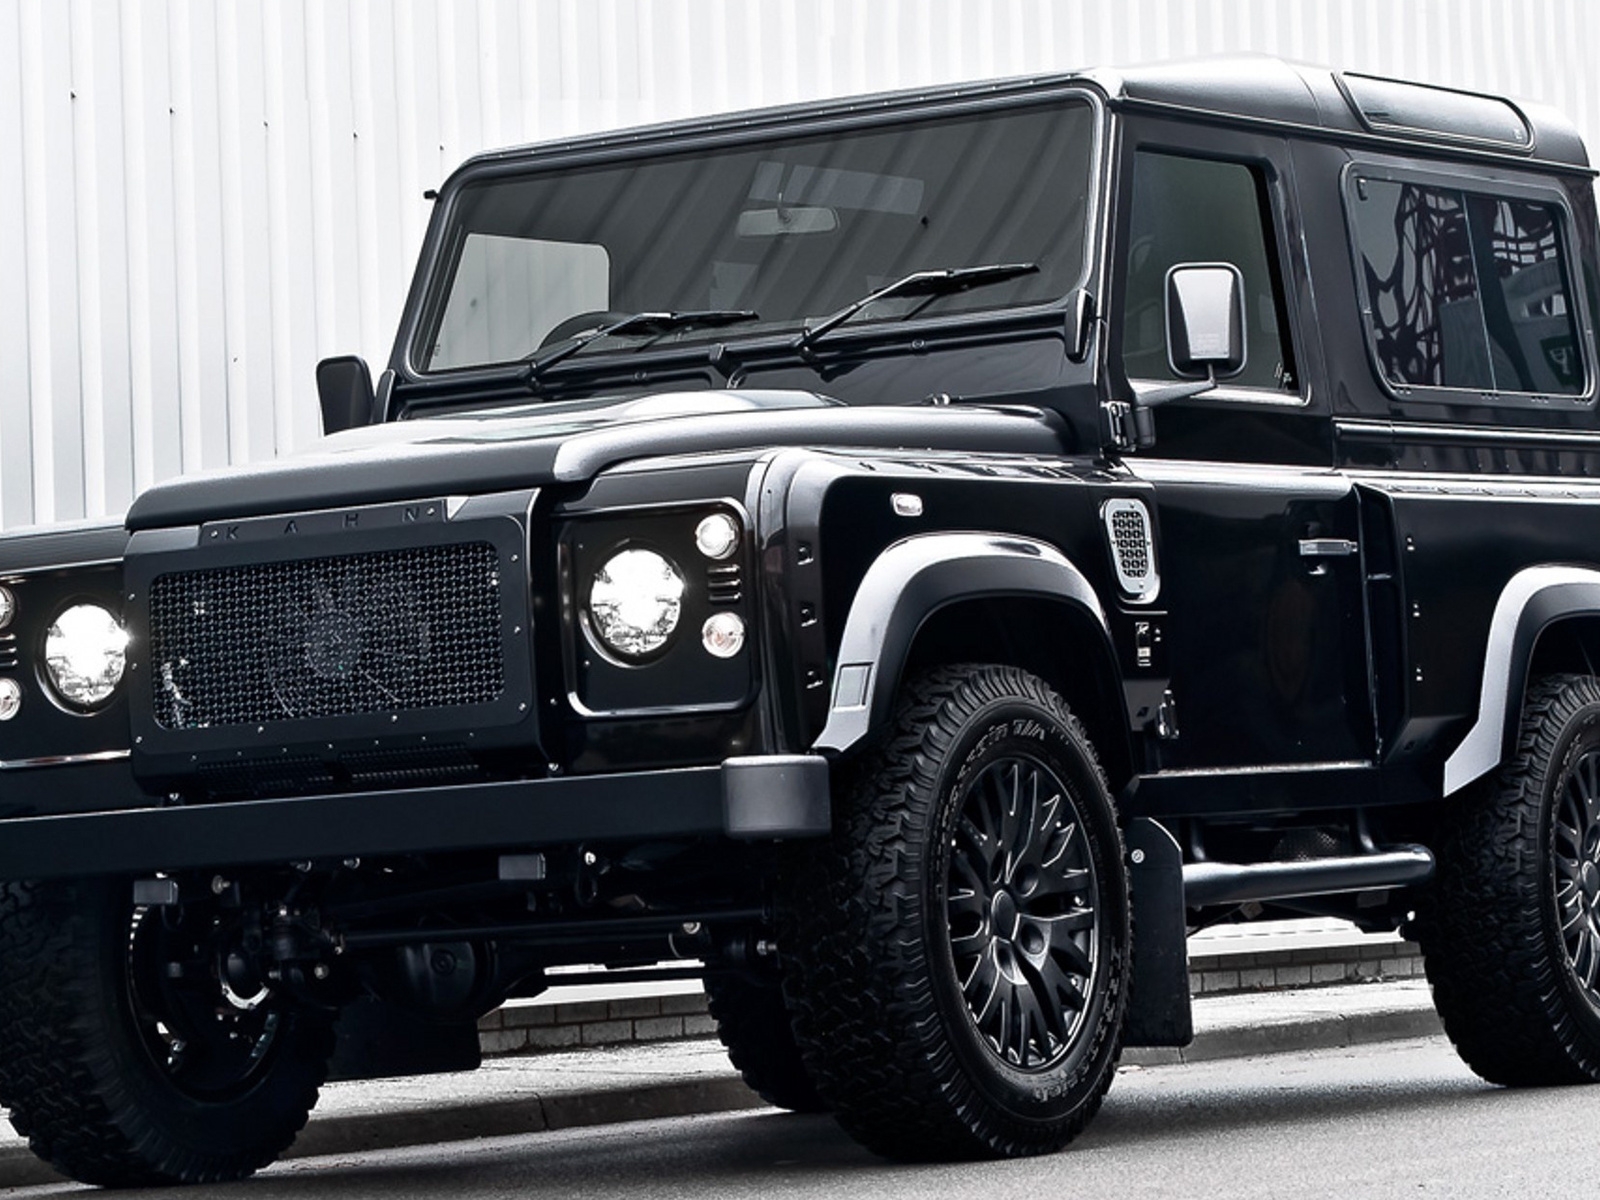 Land Rover Defender Military Edition Kahn Edition for 1600 x 1200 resolution